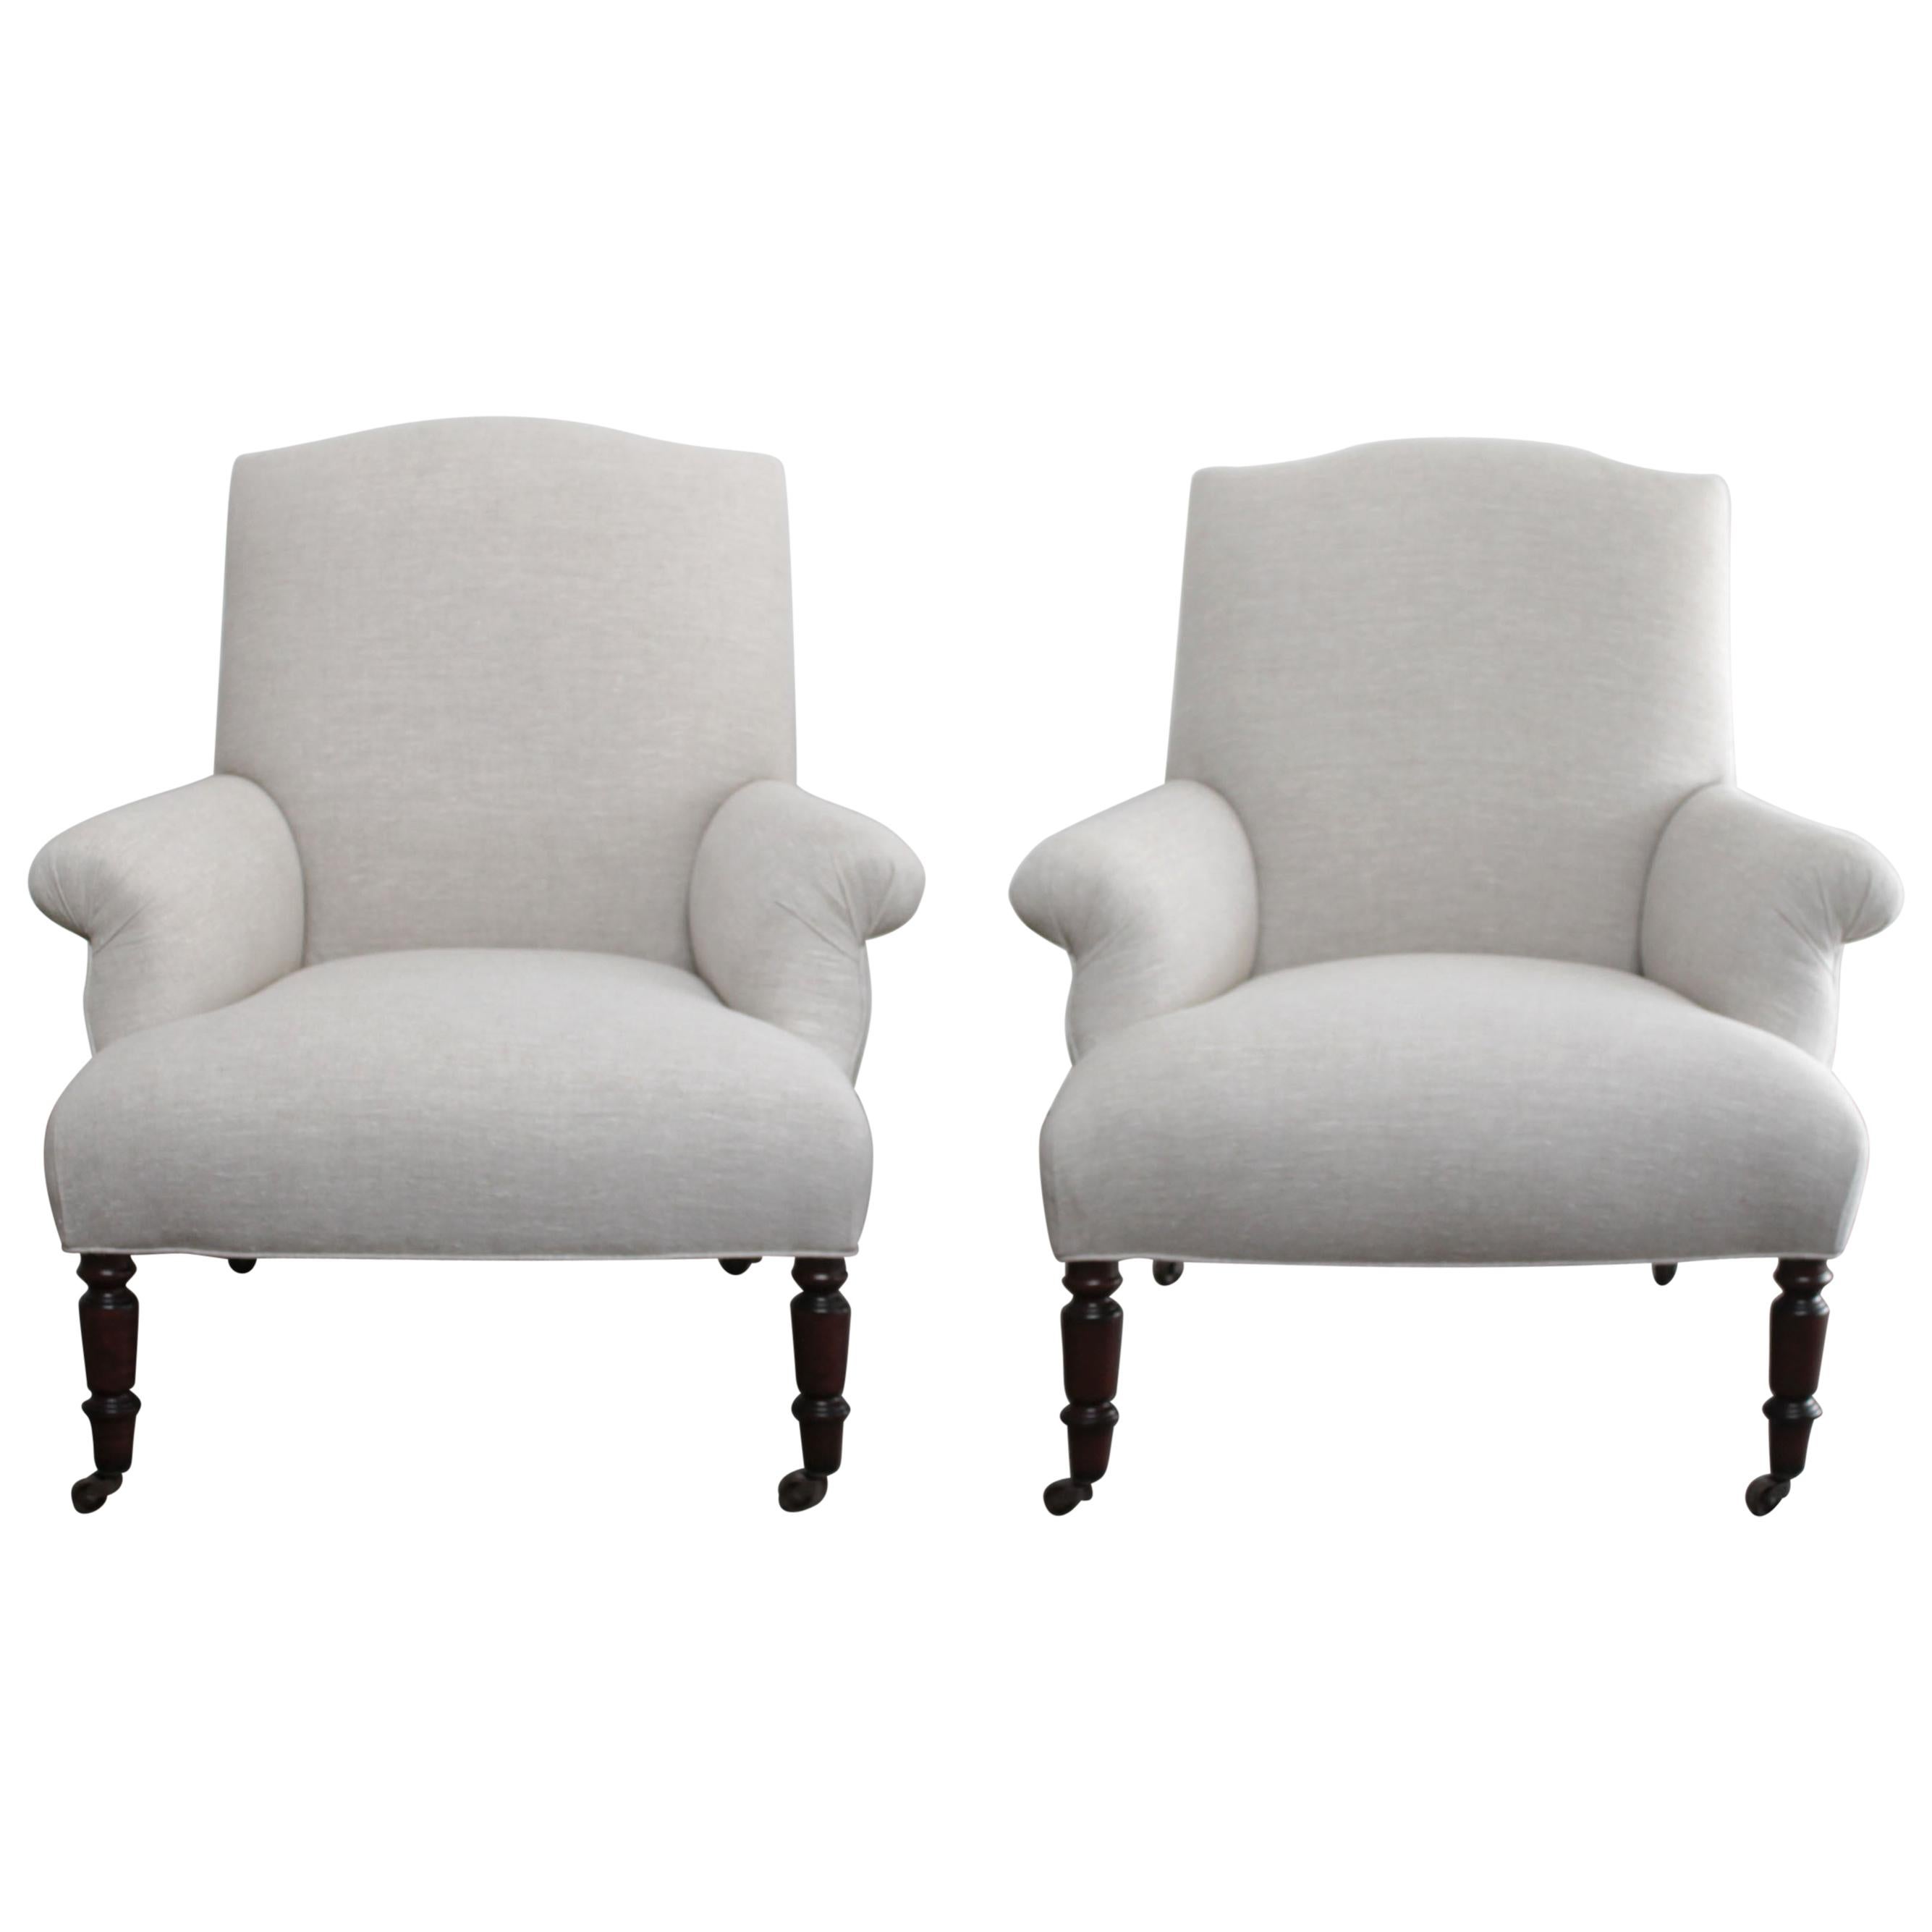 French Inspired Upholstered Linen Bergère Chairs For Sale